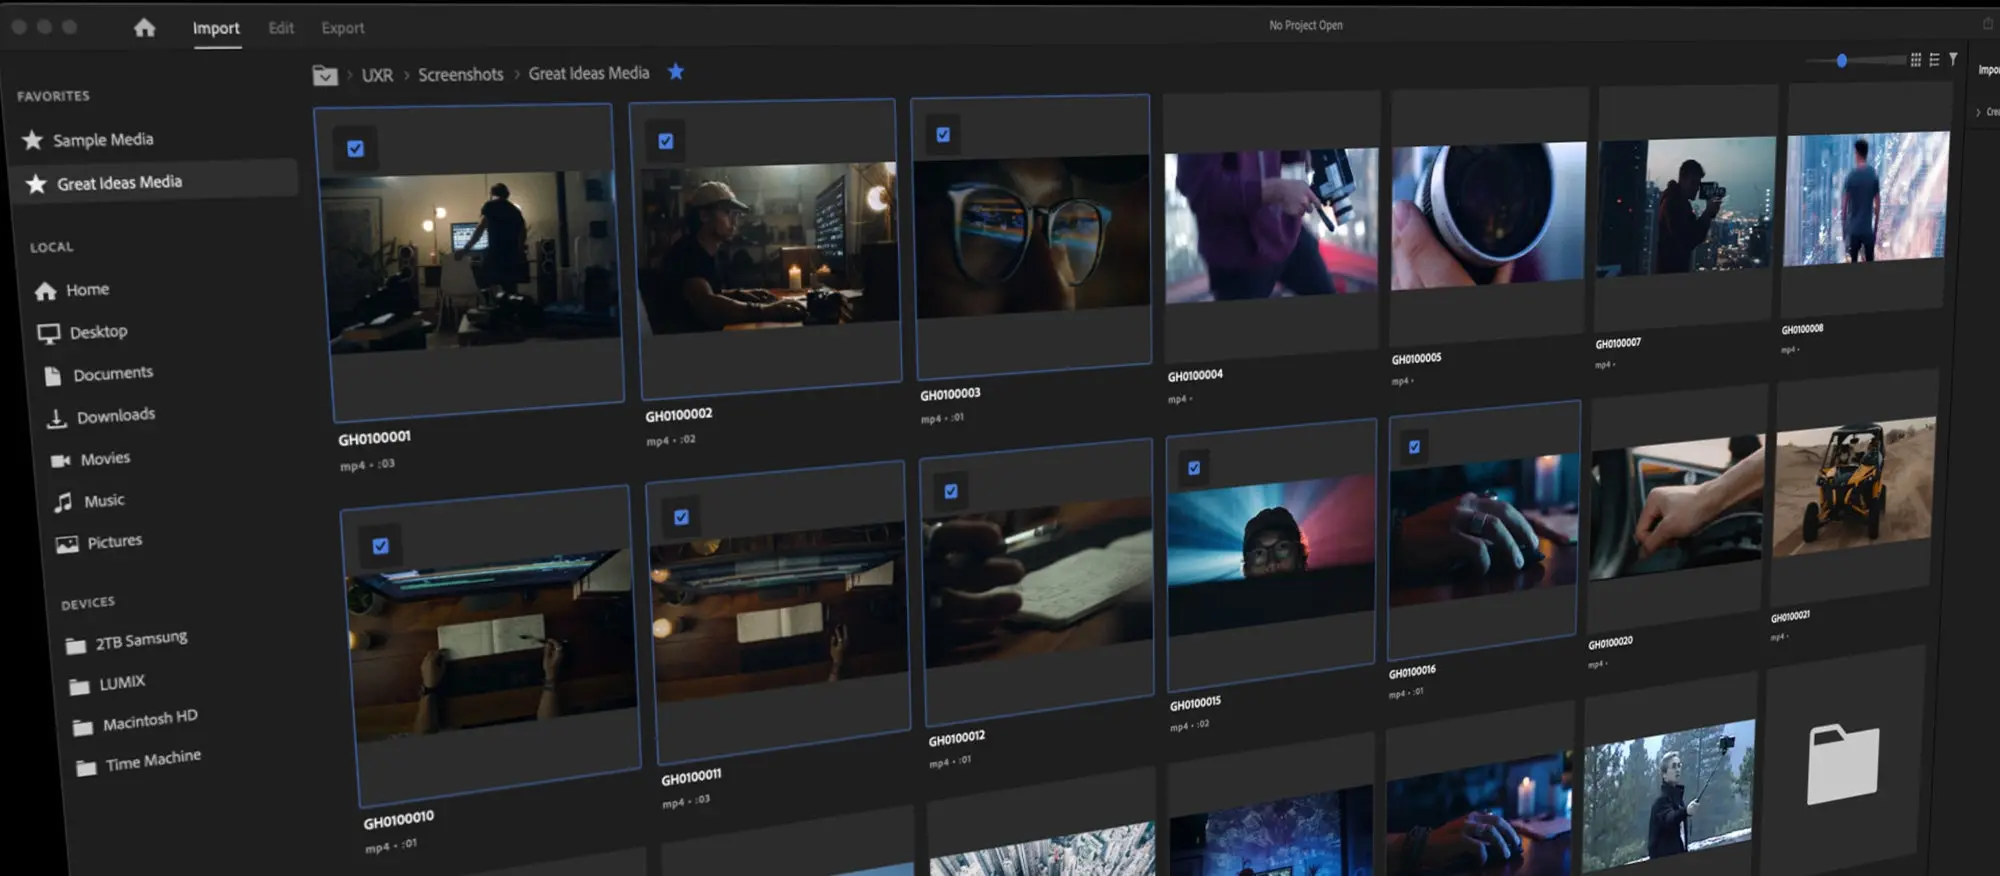 This is a stylized image showing the import mode, now in the Premiere Pro Beta. We see storage locations on the left, such as desktop, media folders, and storage drives, and in the middle of the UI a grid of video thumbnails. Each thumbnails has a small blue check box at the top left corner and some of these are checked, indicating that they will be imported into a new Premiere Pro project.